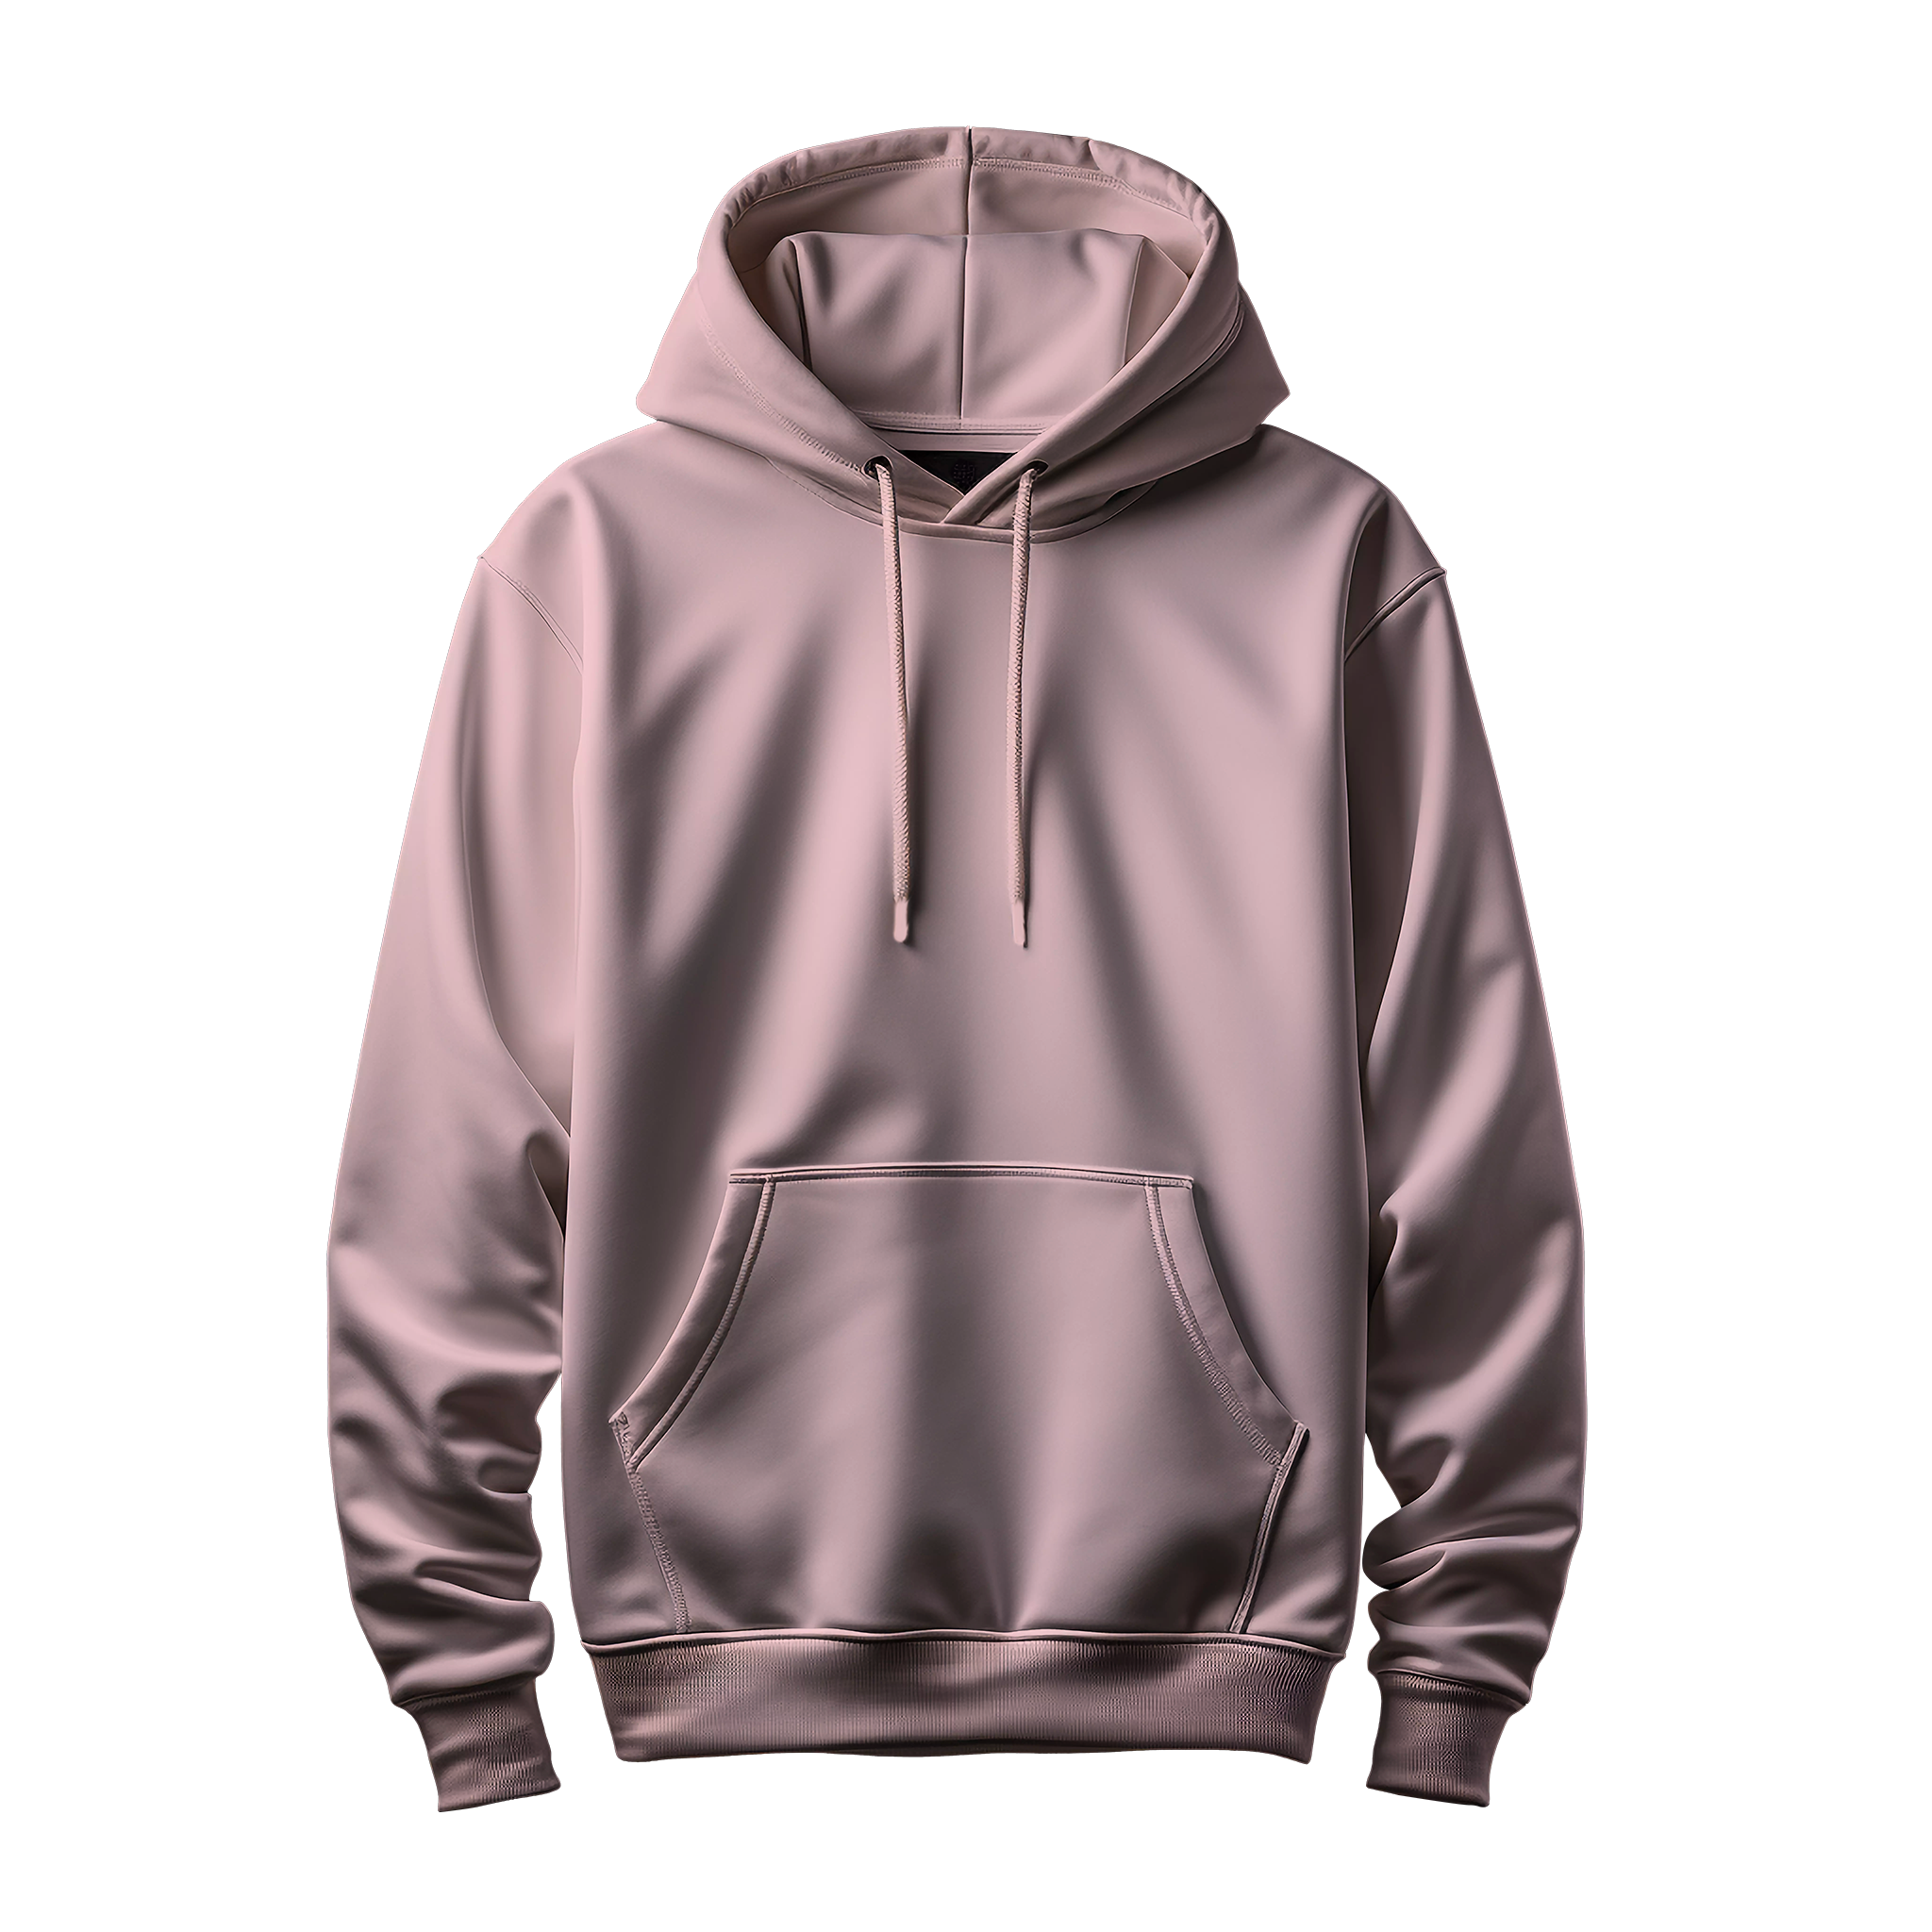 Personalized date+initial hoodie